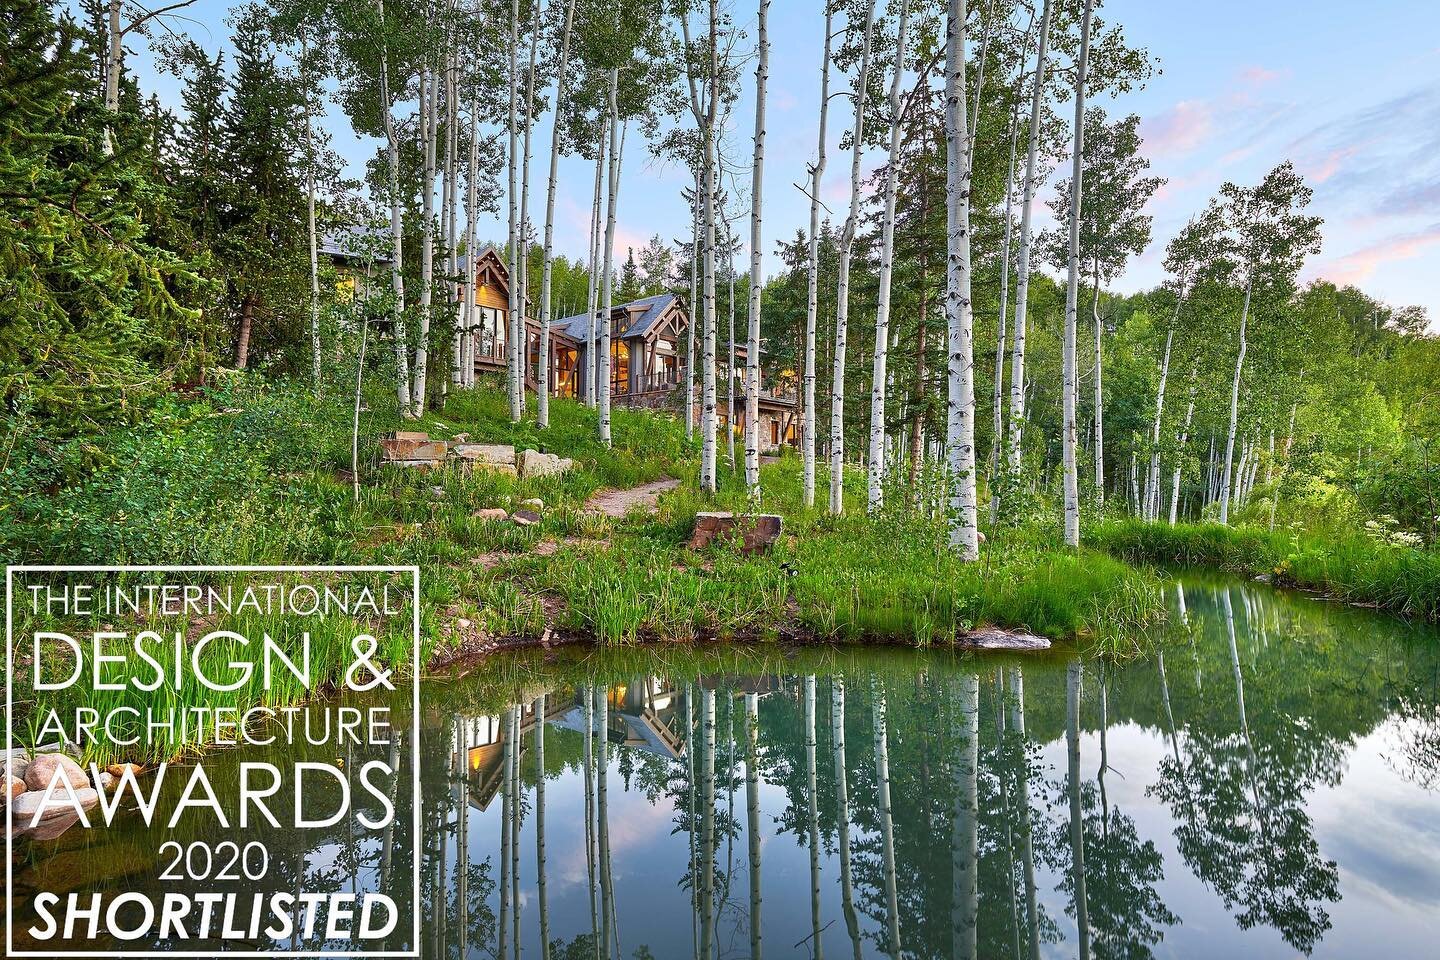 We are delighted to announce that our Edgewood Creek Residence has been shortlisted for The International Design and Architecture Awards 2020 hosted by @design.et.al !

#kadesignworks
.
.
.
.
#aspensnowmass #snowmassvillage #colorado #home #house #ar